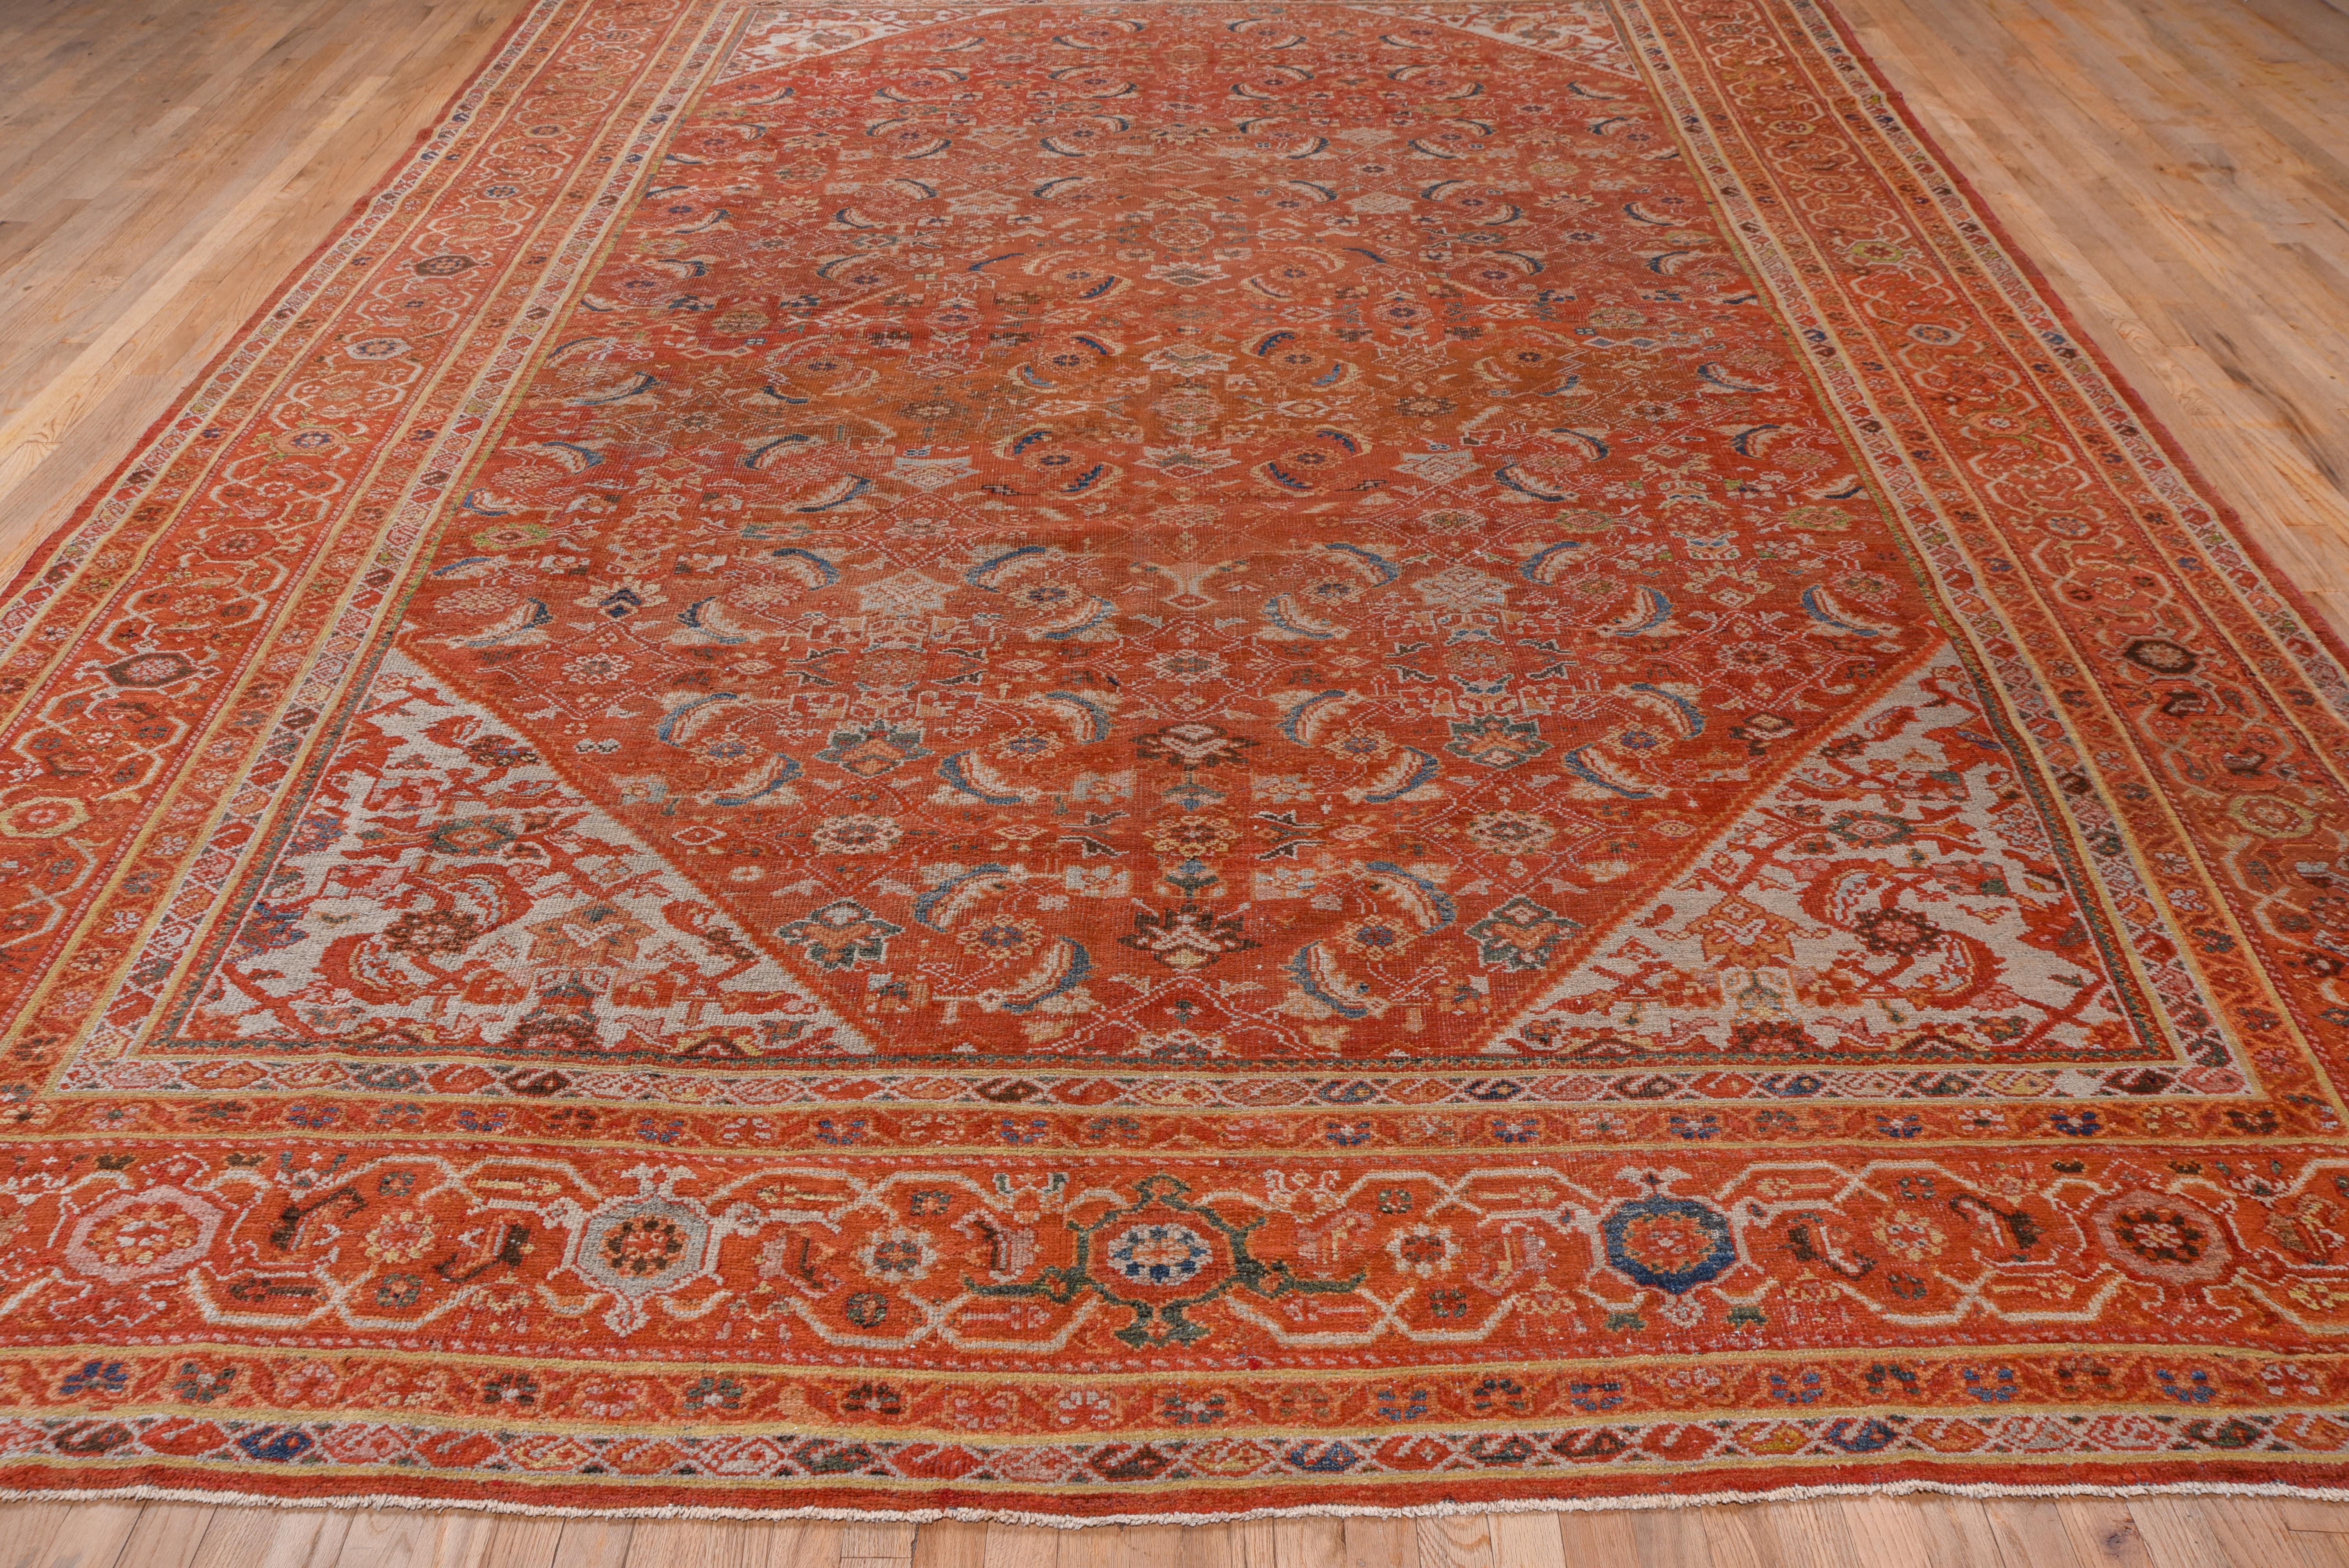 Allover herati patten on the red-brown field and on the off white triangular corner; and both in the same scale on this west Persian rustic carpet with a salmon, reversing turtle palmette border. Light blue, maize and brown accents.